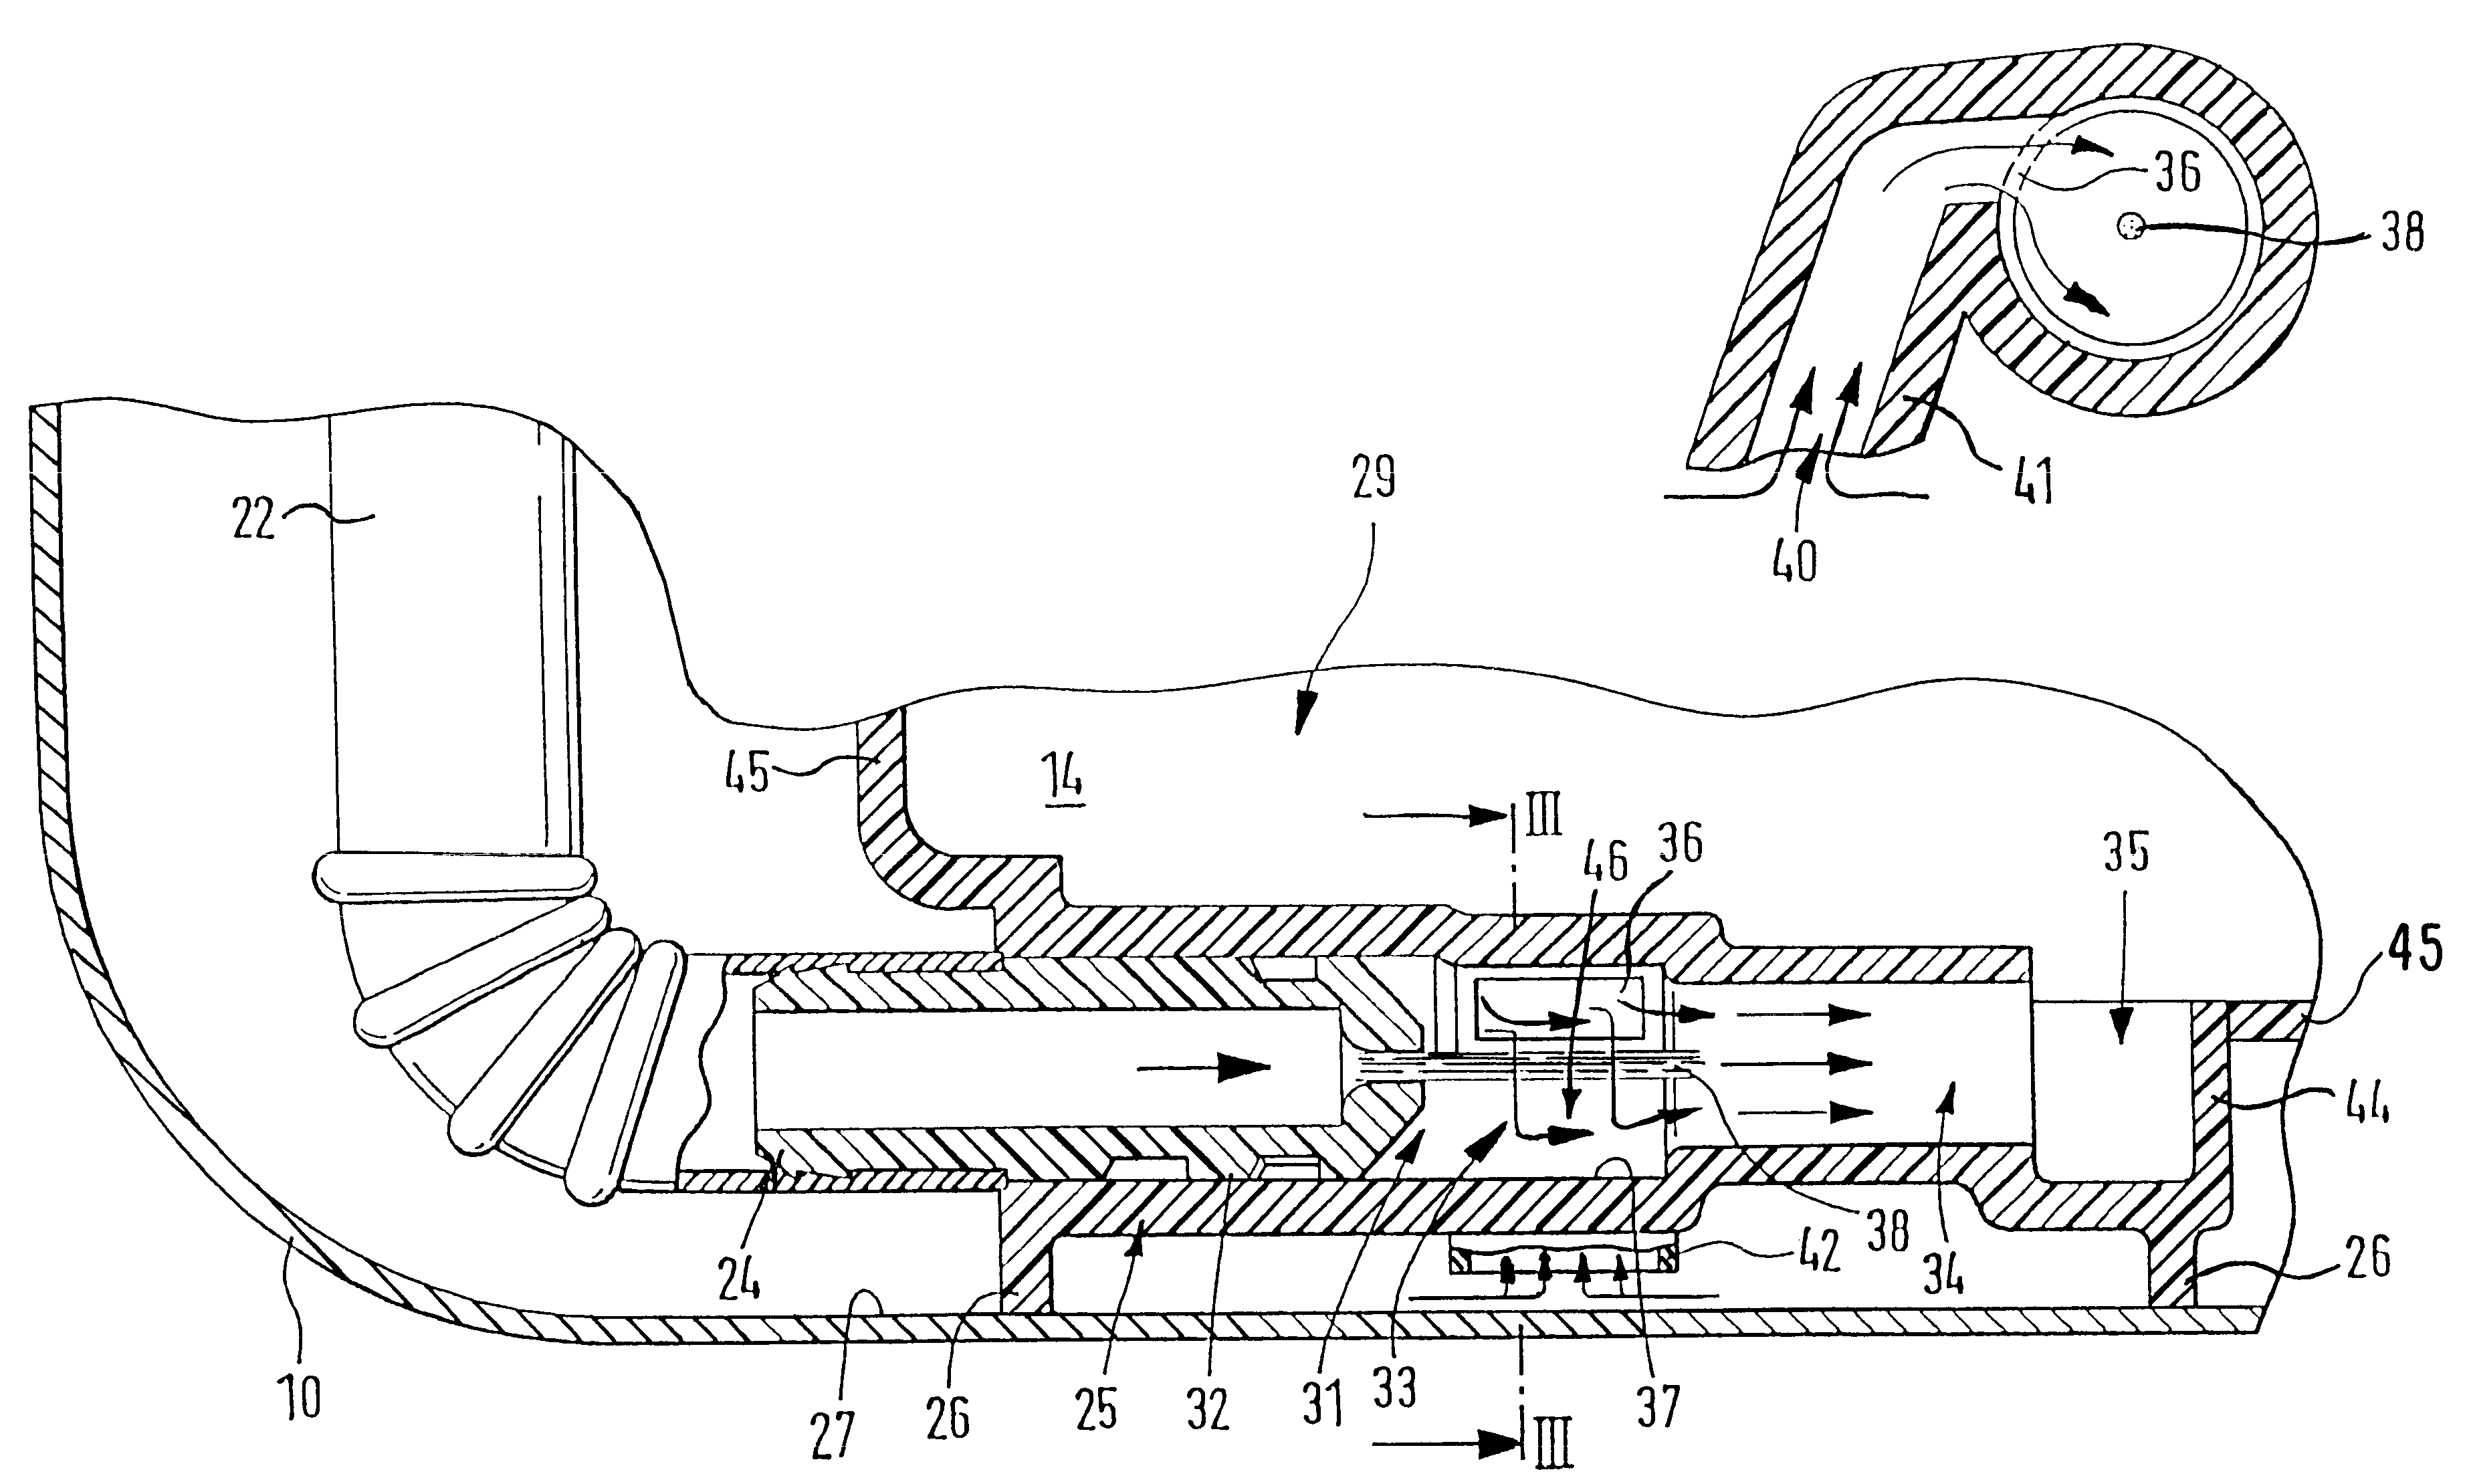 Device for delivering fuel from a storage tank to the internal combustion engine of a motor vehicle